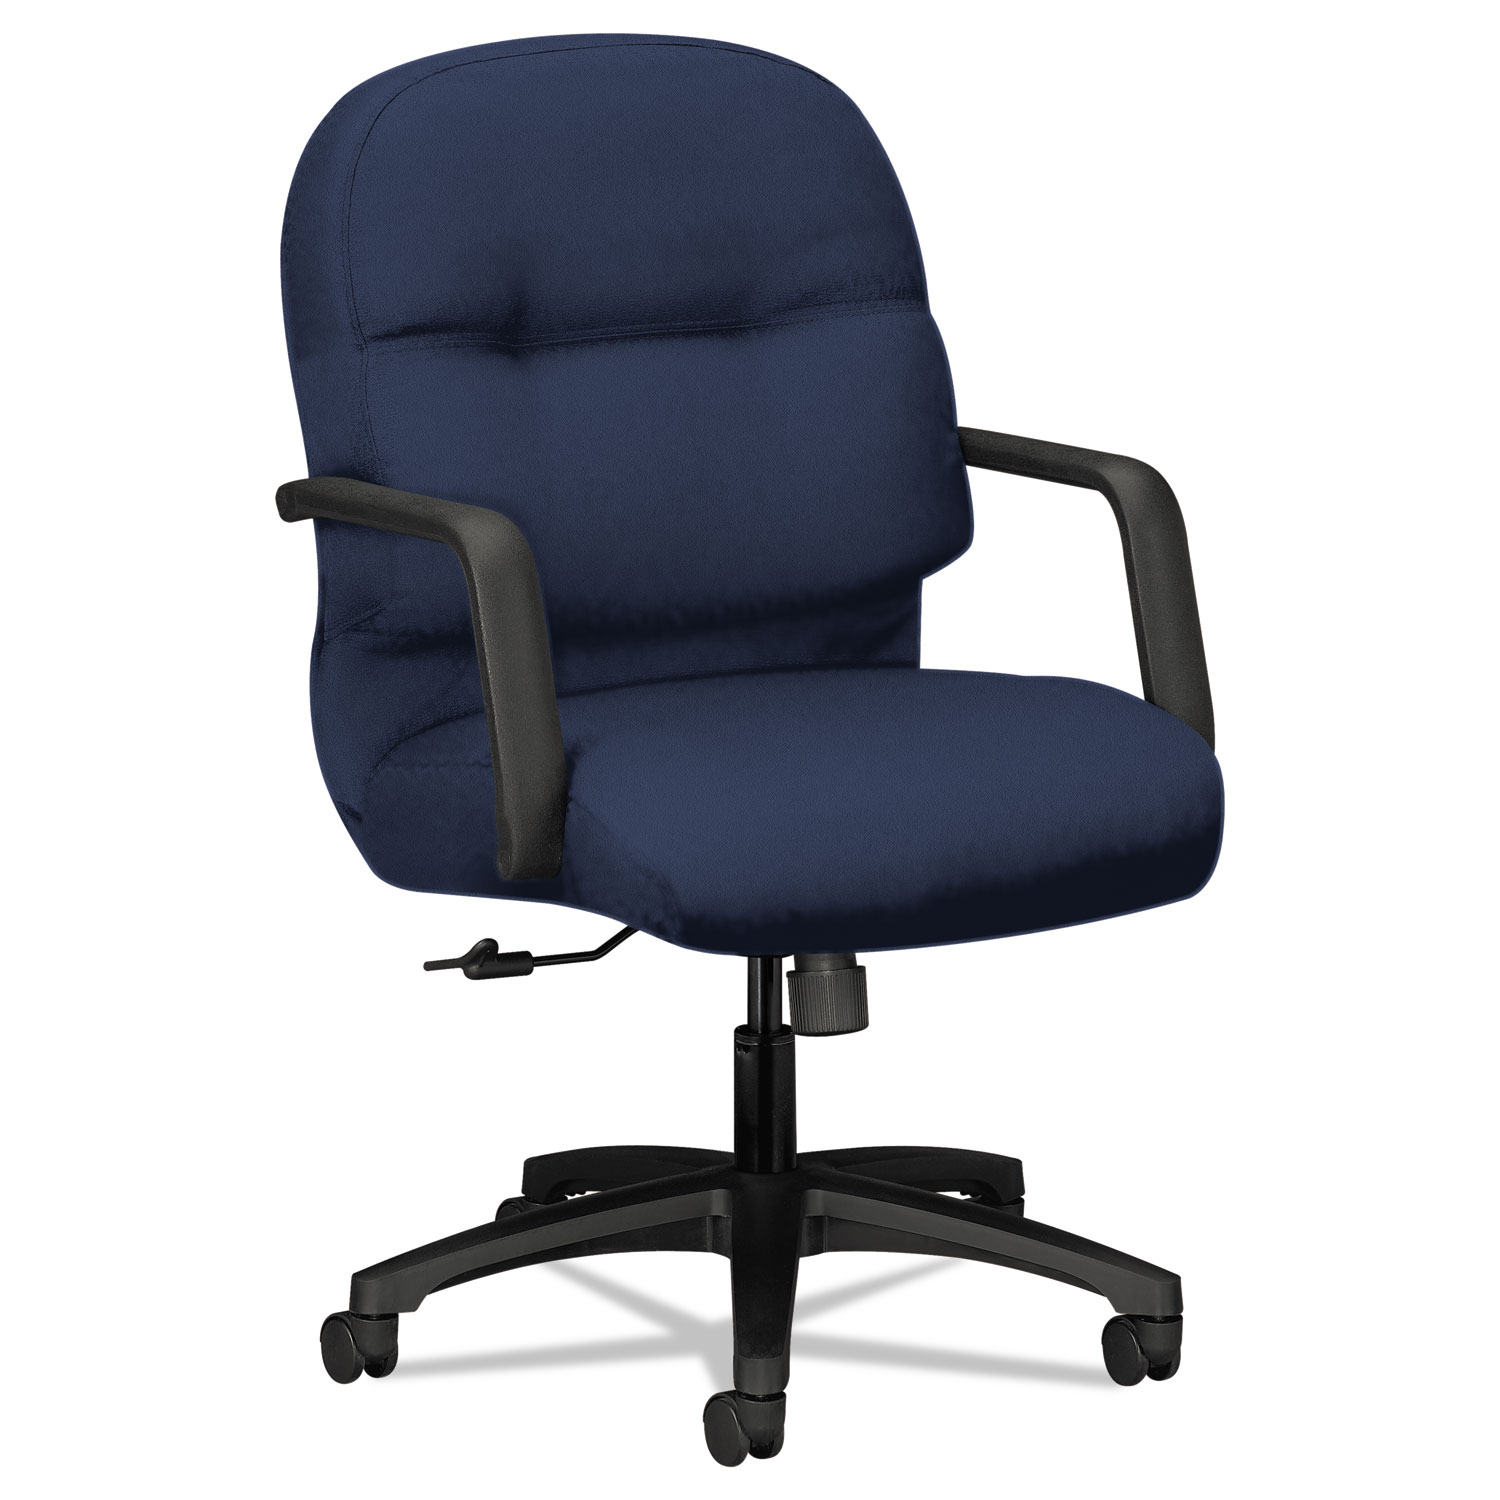  HON H2092.H.CU98.T Pillow-Soft 2090 Series Managerial Mid-Back Swivel/Tilt Chair, Supports up to 300 lbs., Navy Seat/Navy Back, Black Base (HON2092CU98T) 